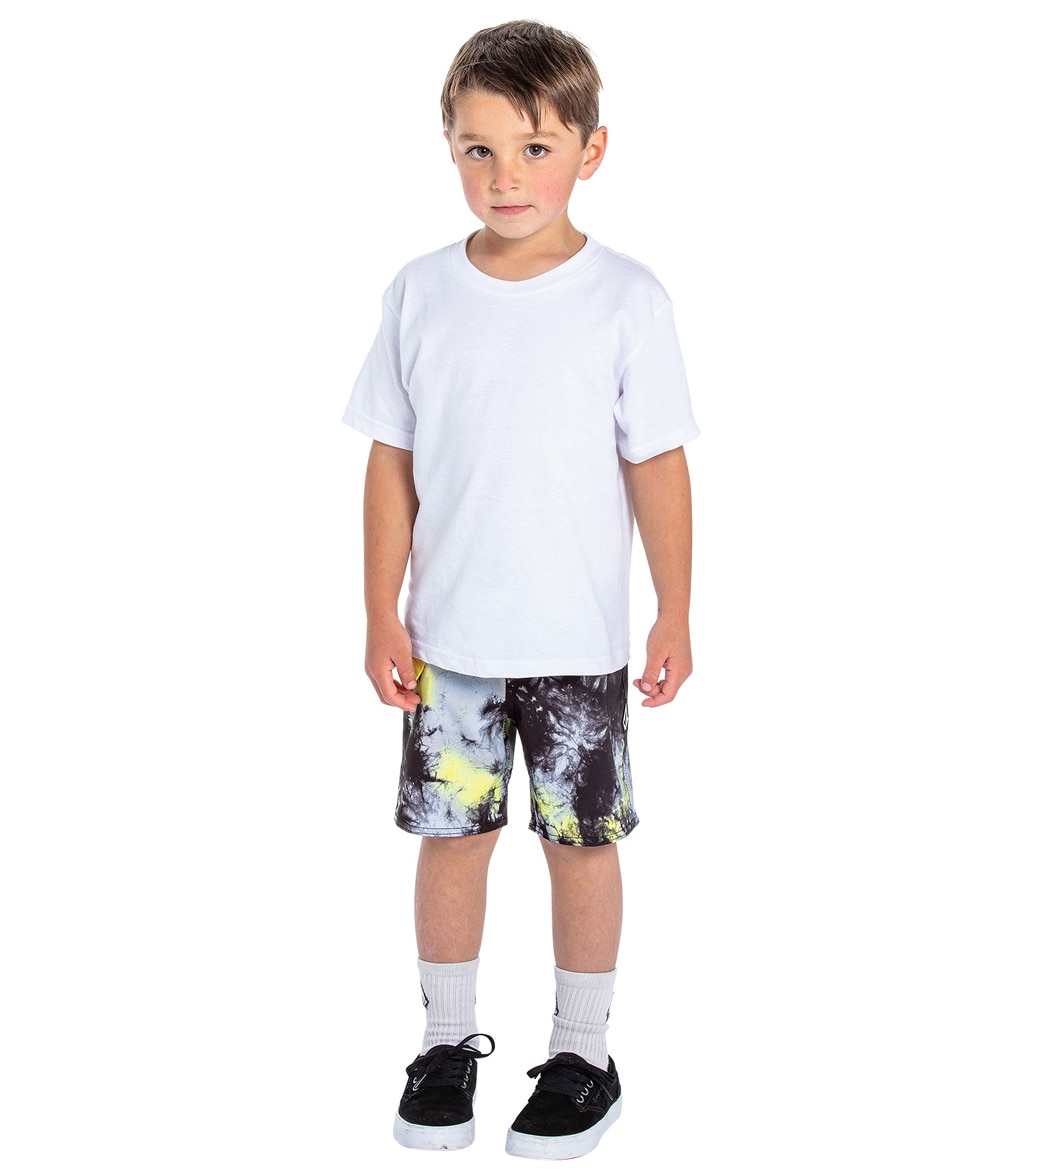 Volcom Boys' Saturate Mod Boardshorts Toddler - Lime Tie Dye 2T - Swimoutlet.com